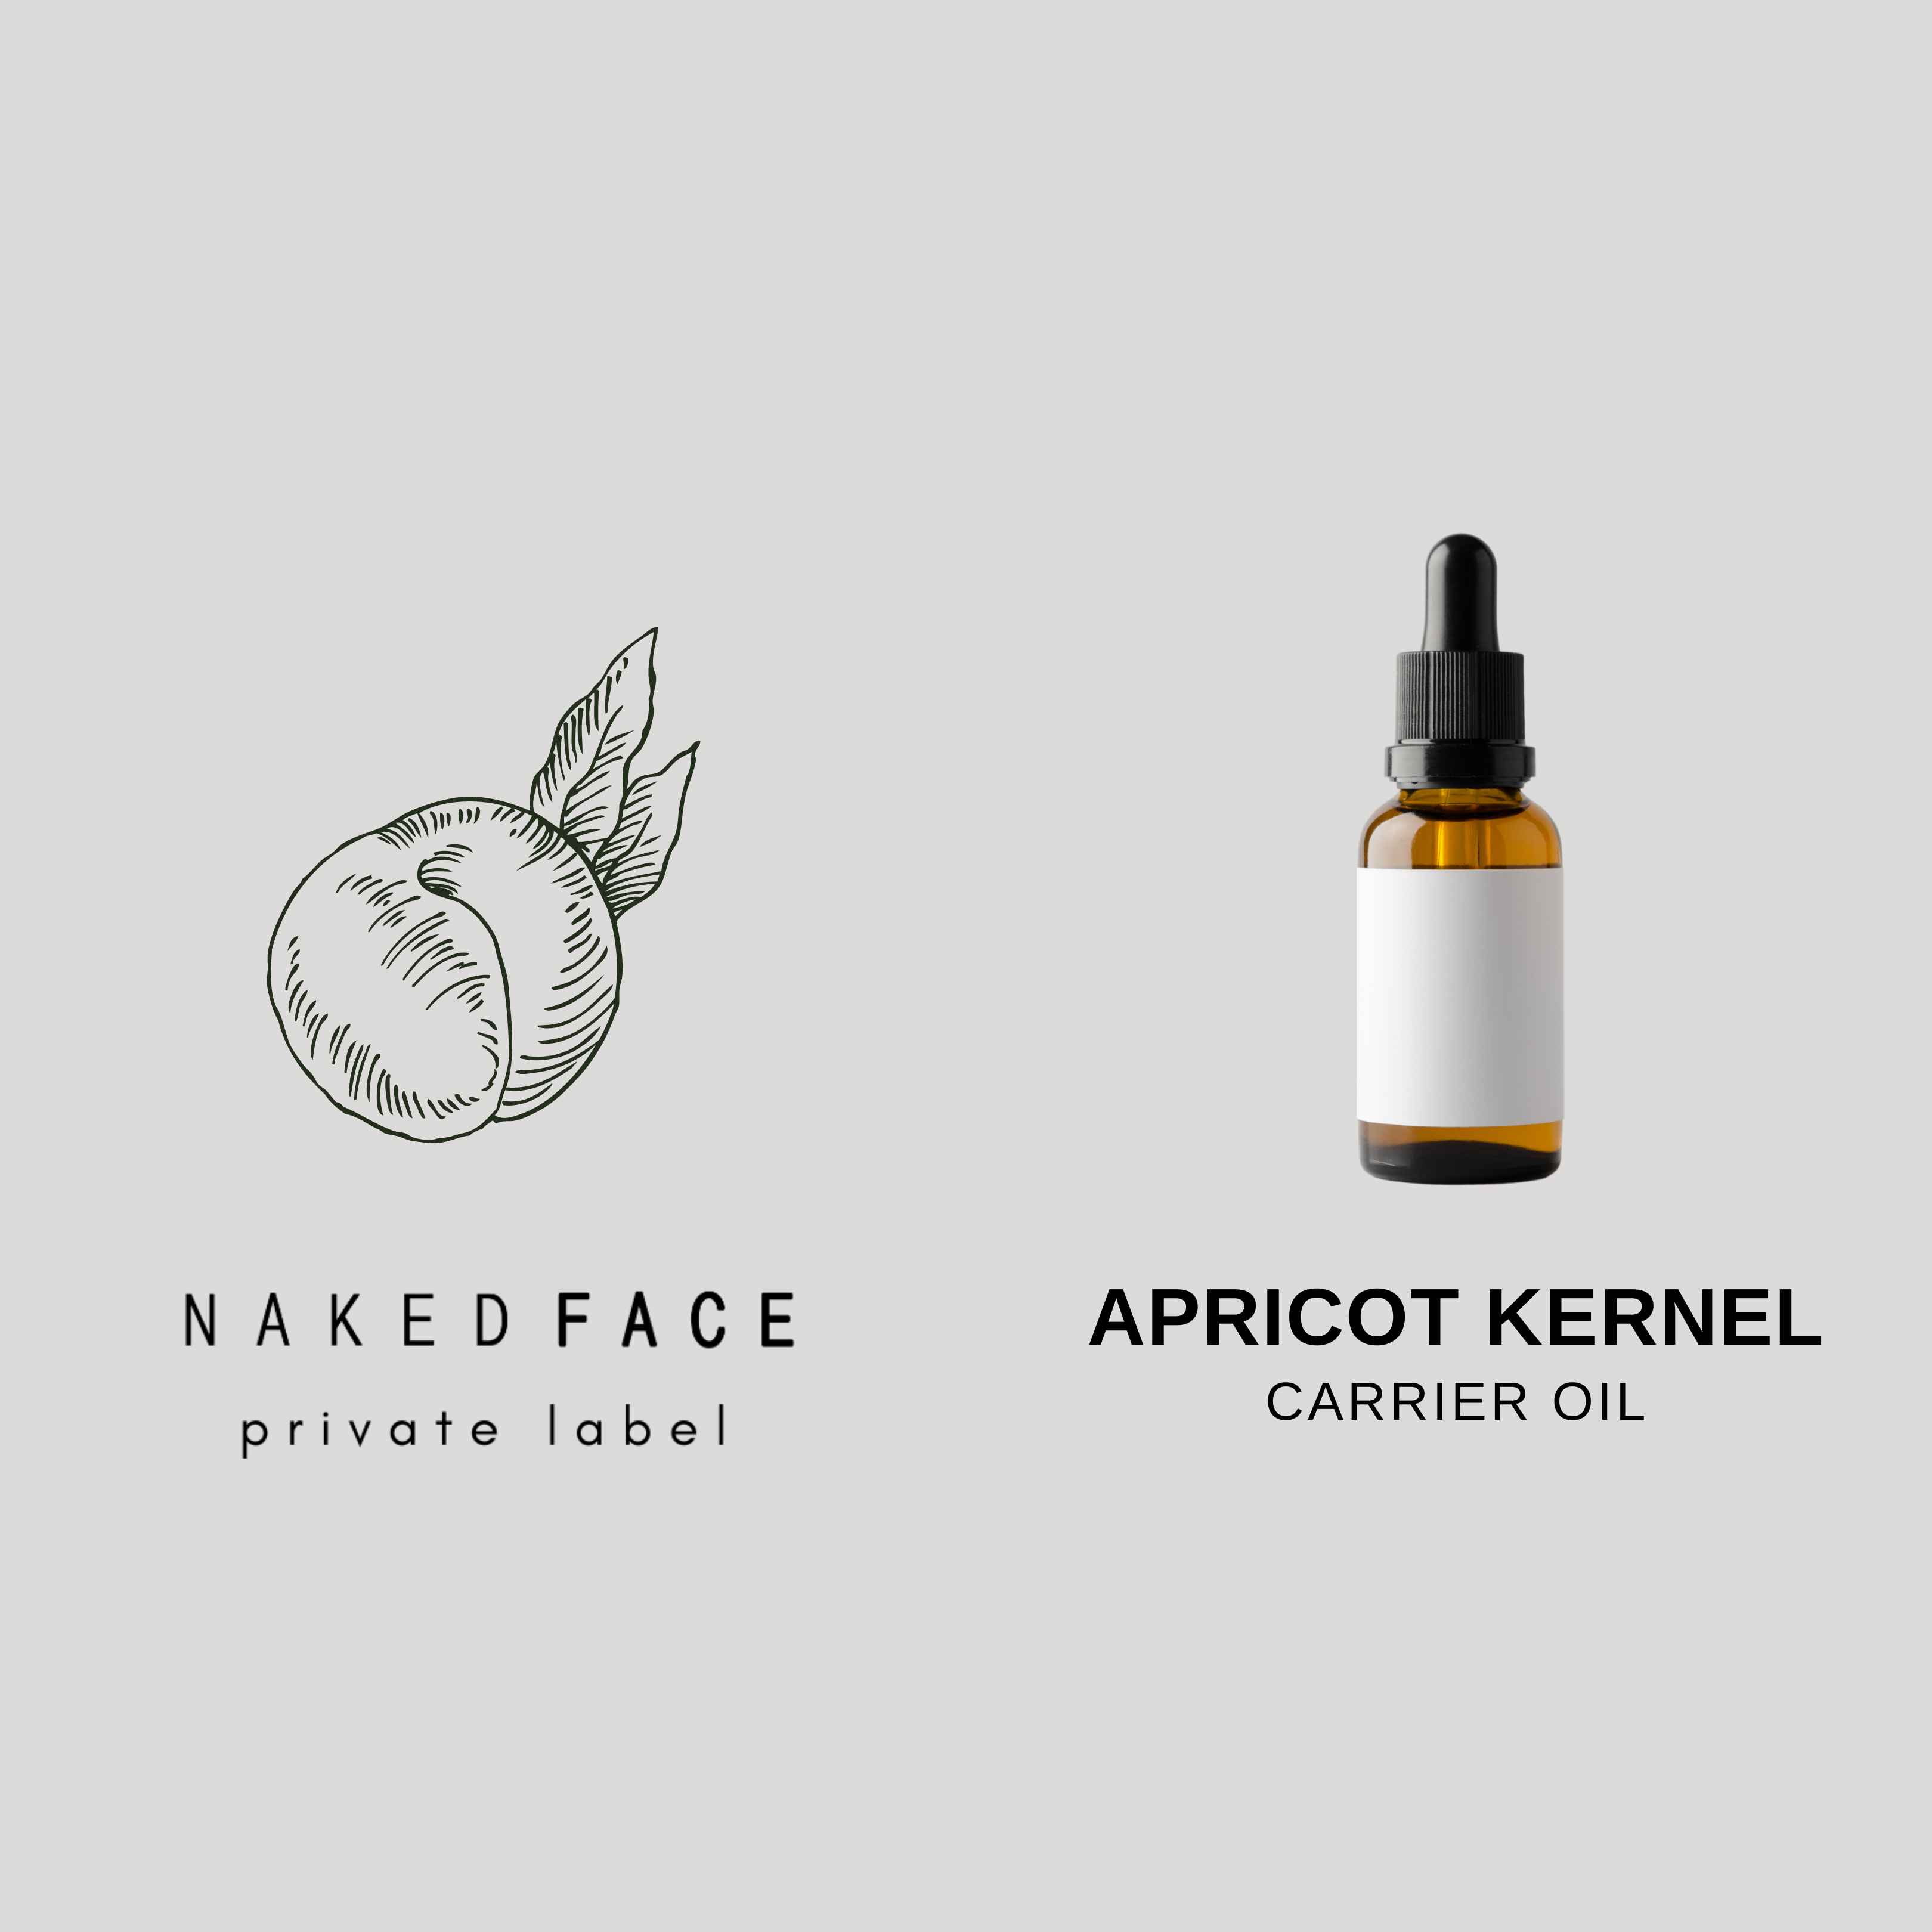 Apricot oil skin benefits -provides nourishment  -creates natural barrier  -rich in Vitamin A and anti-aging  -promotes a natural glow look  -improve skin texture  -long-lasting hydration  -contains natural Vitamin B17  -anti-inflammatory